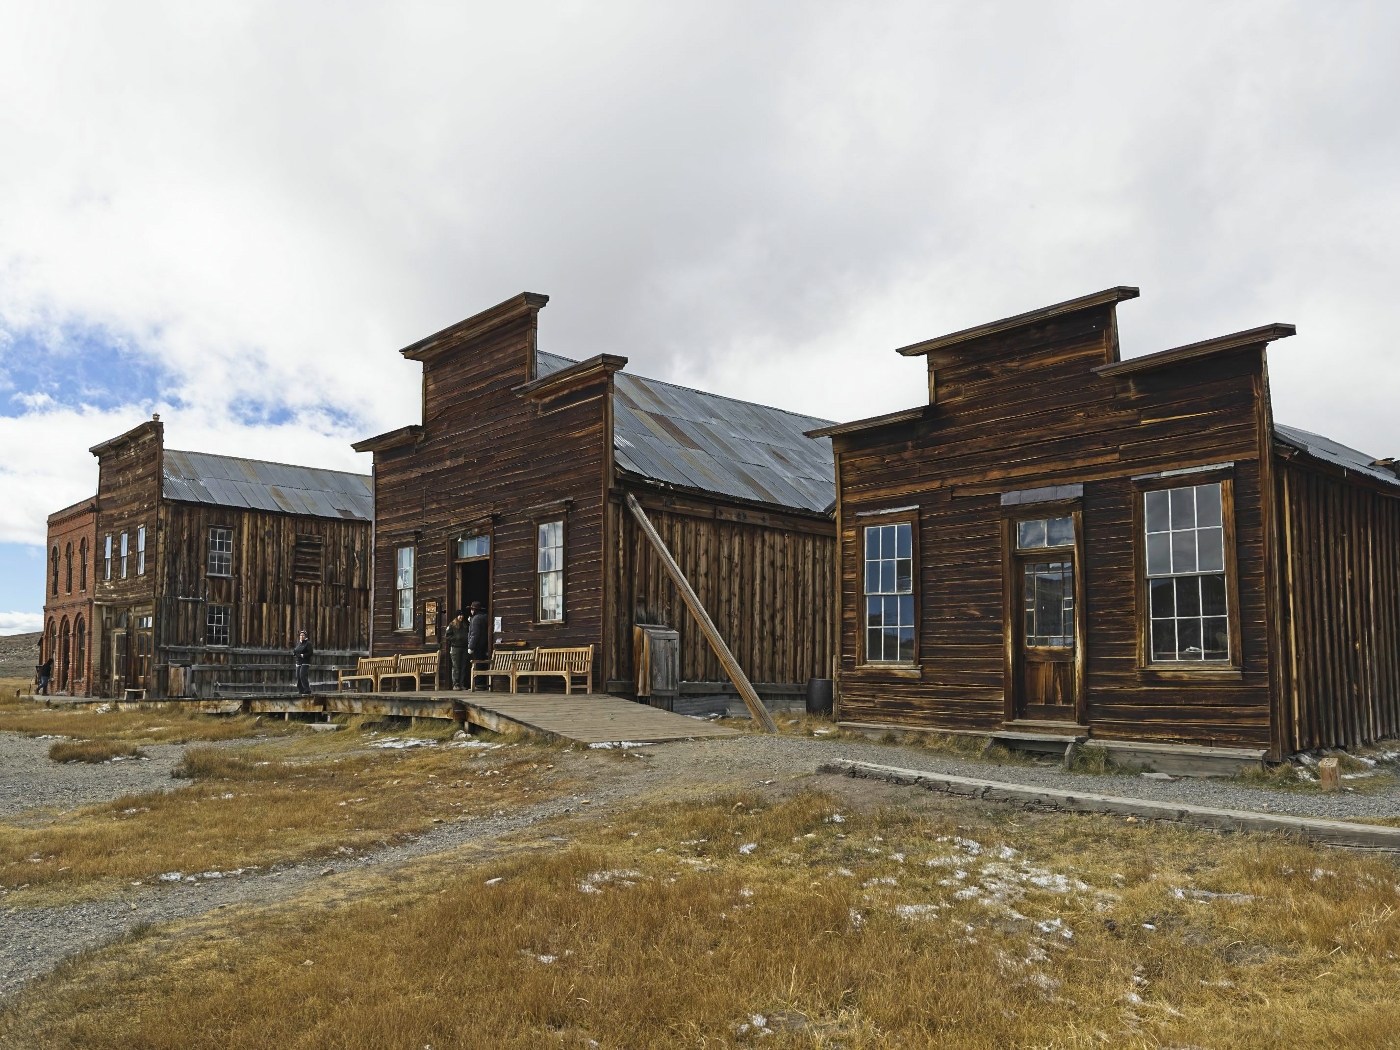 Main street in the California ghost town of Bodie.